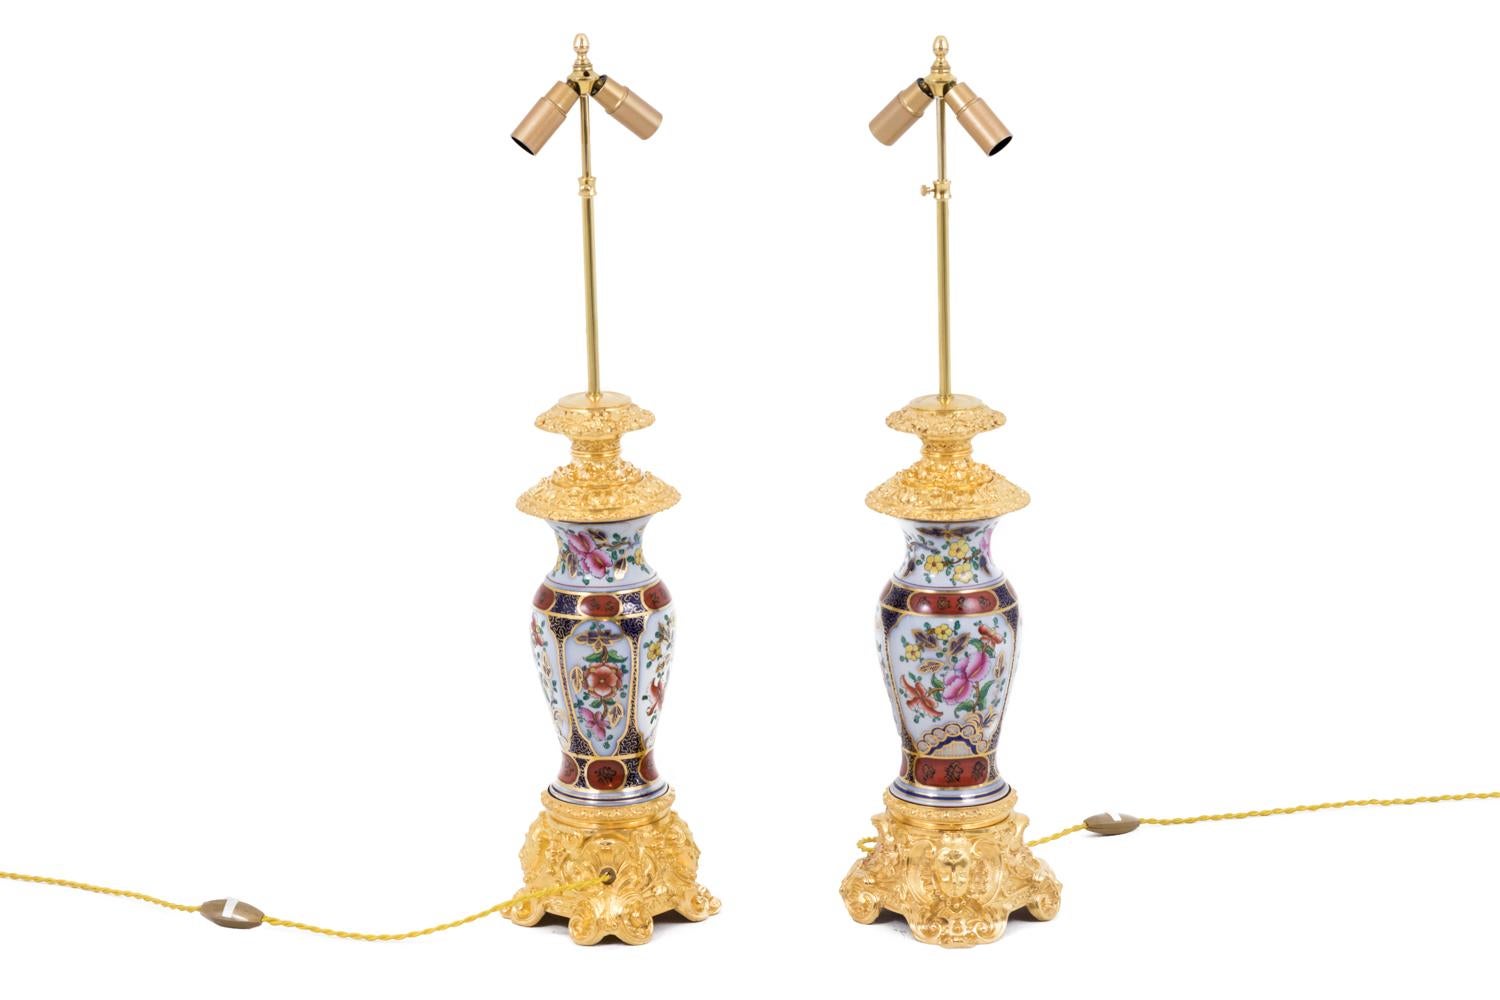 Baluster shape pair of lamps in Valentine porcelain. Decor of flowers in white background cartouches, on a cobalt blue background with gilt geometrical motifs. They are framed by two same background friezes adorned with red oval cartouches with